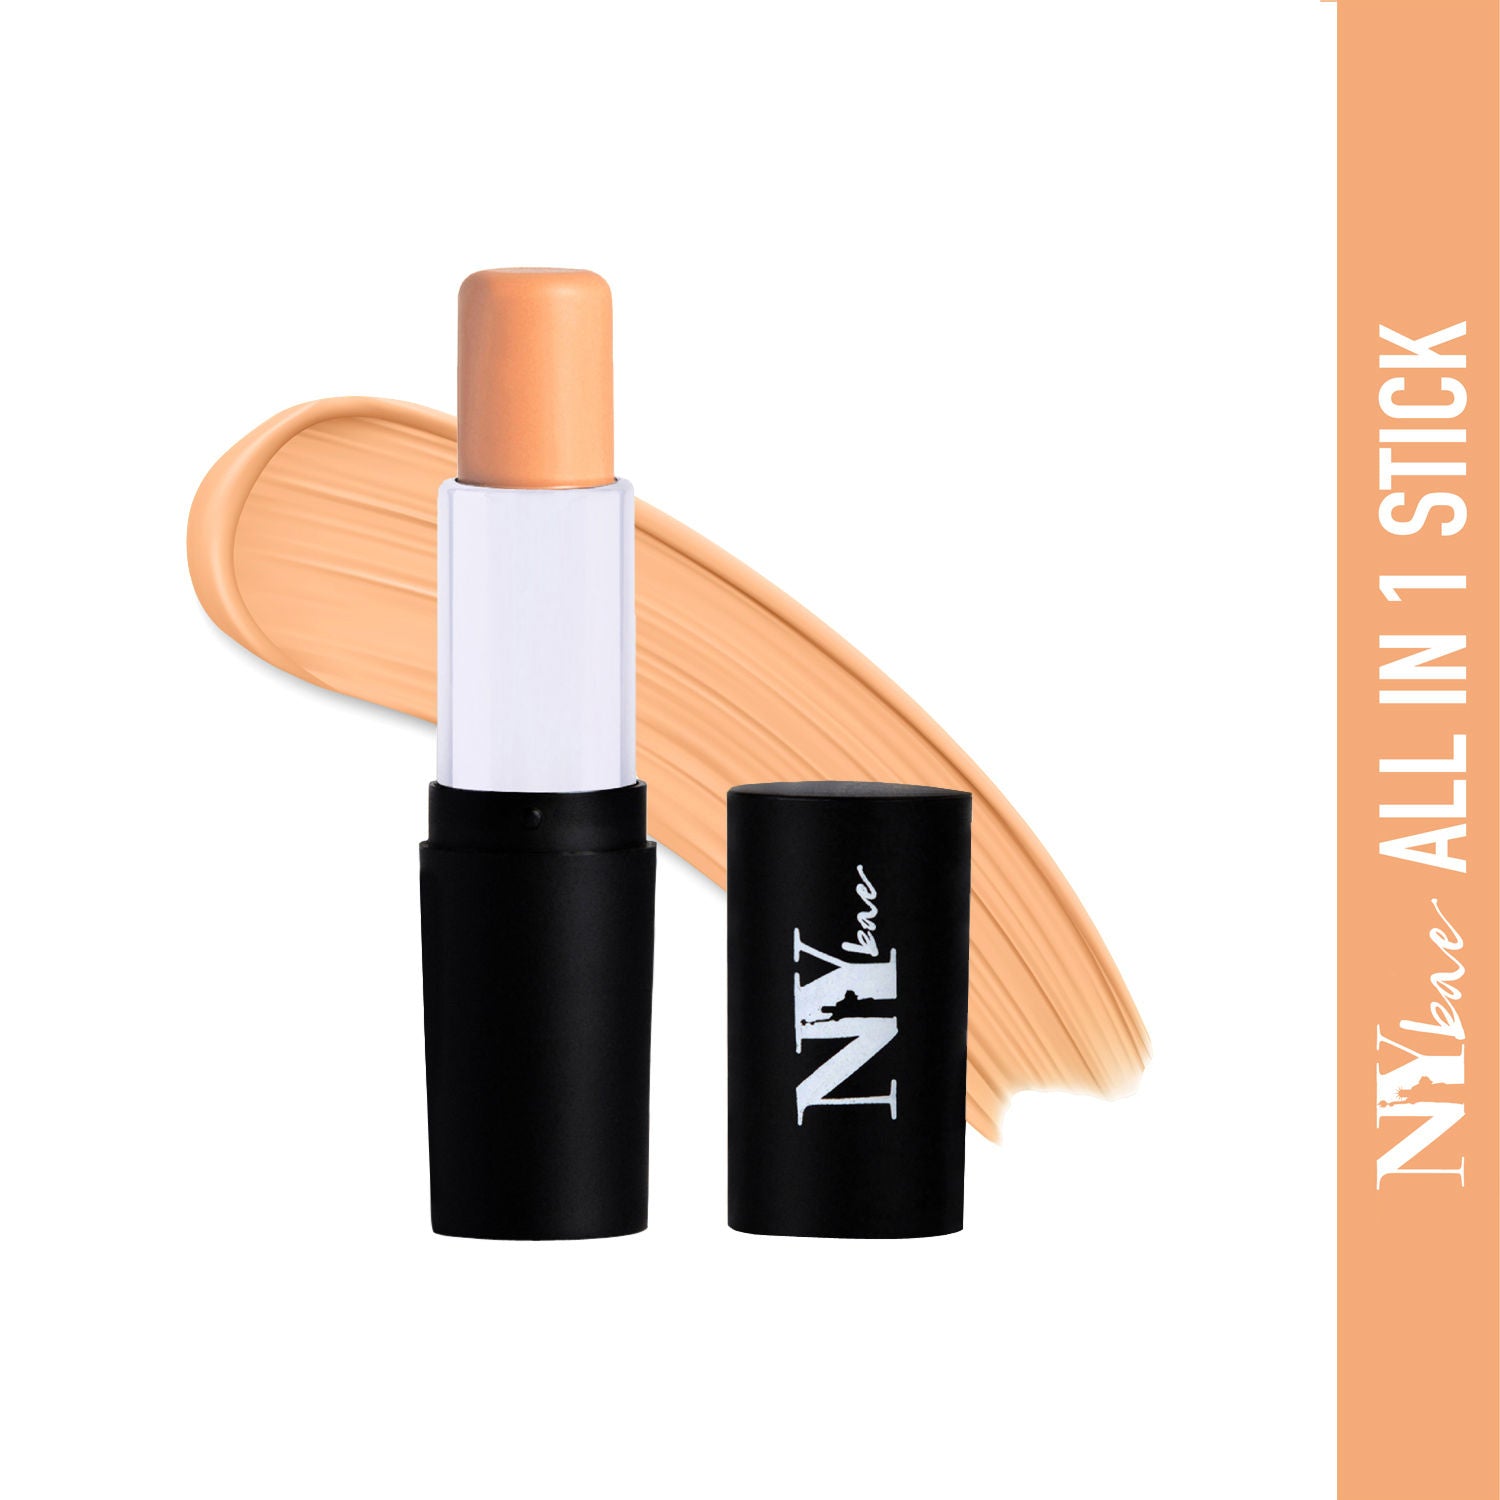 Buy Found ation Concealer Color Corrector Stick, For Fair Skin - N Sunnyside Up 20 at Price – N Y Bae Store